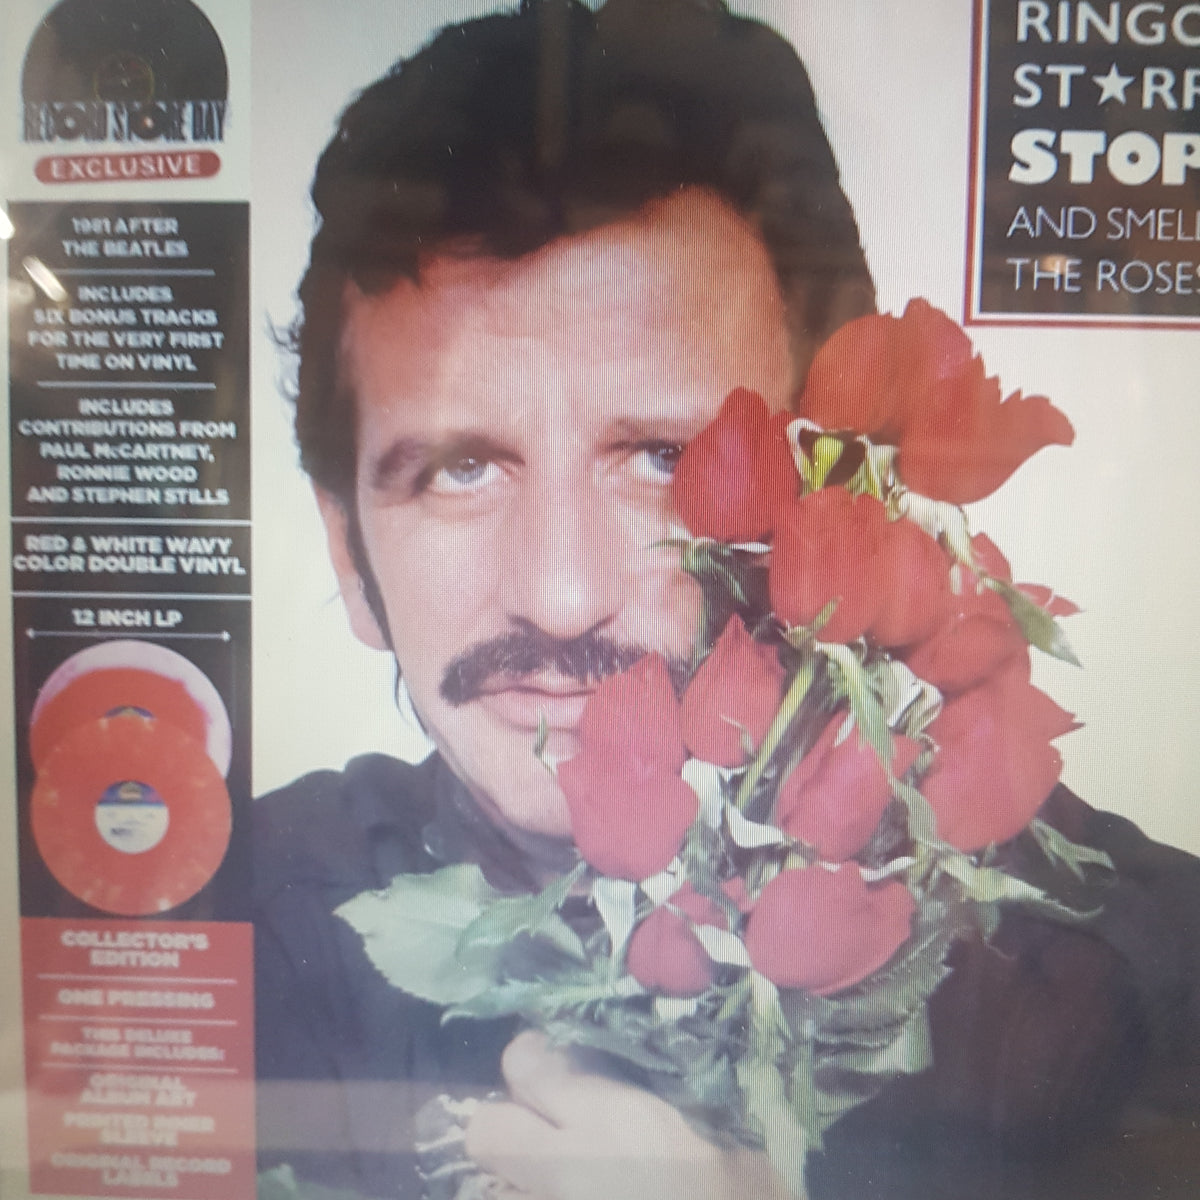 Ringo Starr Stop And Smell The Roses Coloured 2lp Rsd 2023 Vinyl 4758